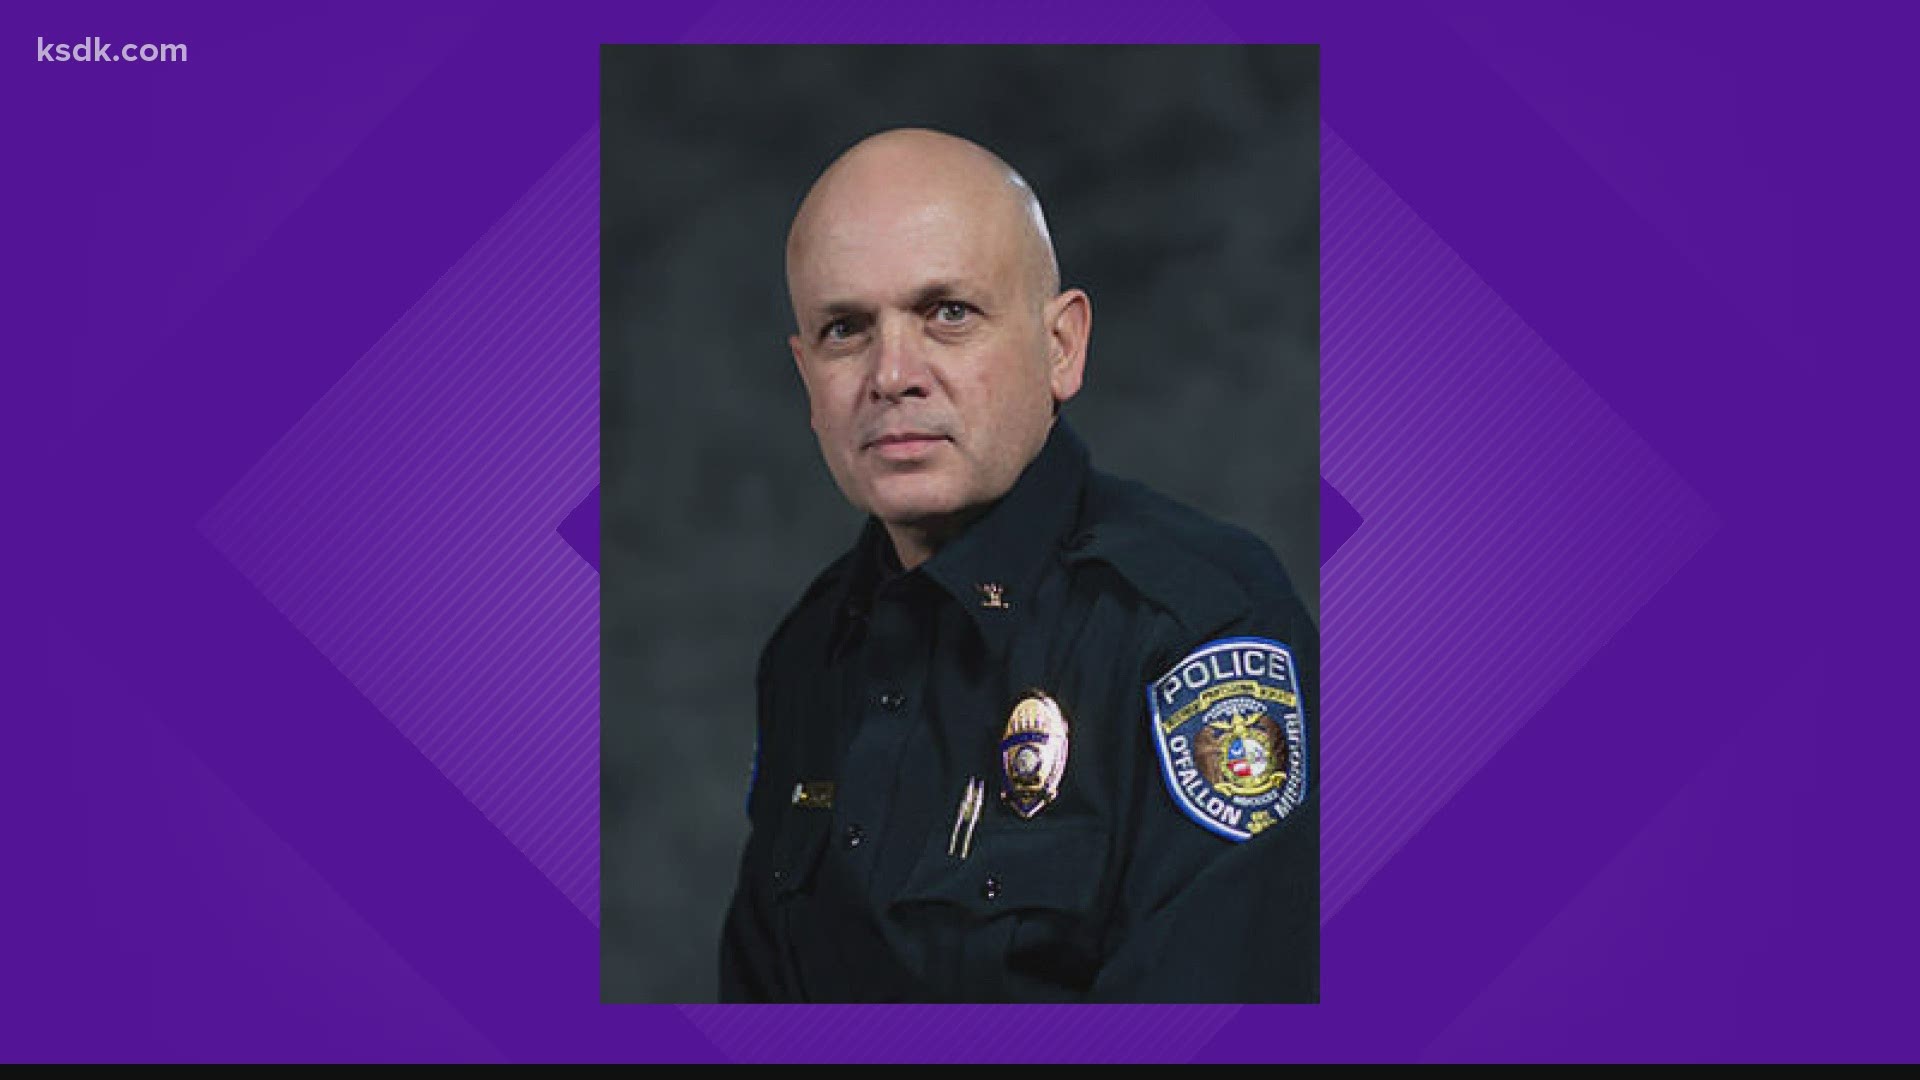 The resignation comes just 18 months after becoming chief of the O'Fallon Police Department